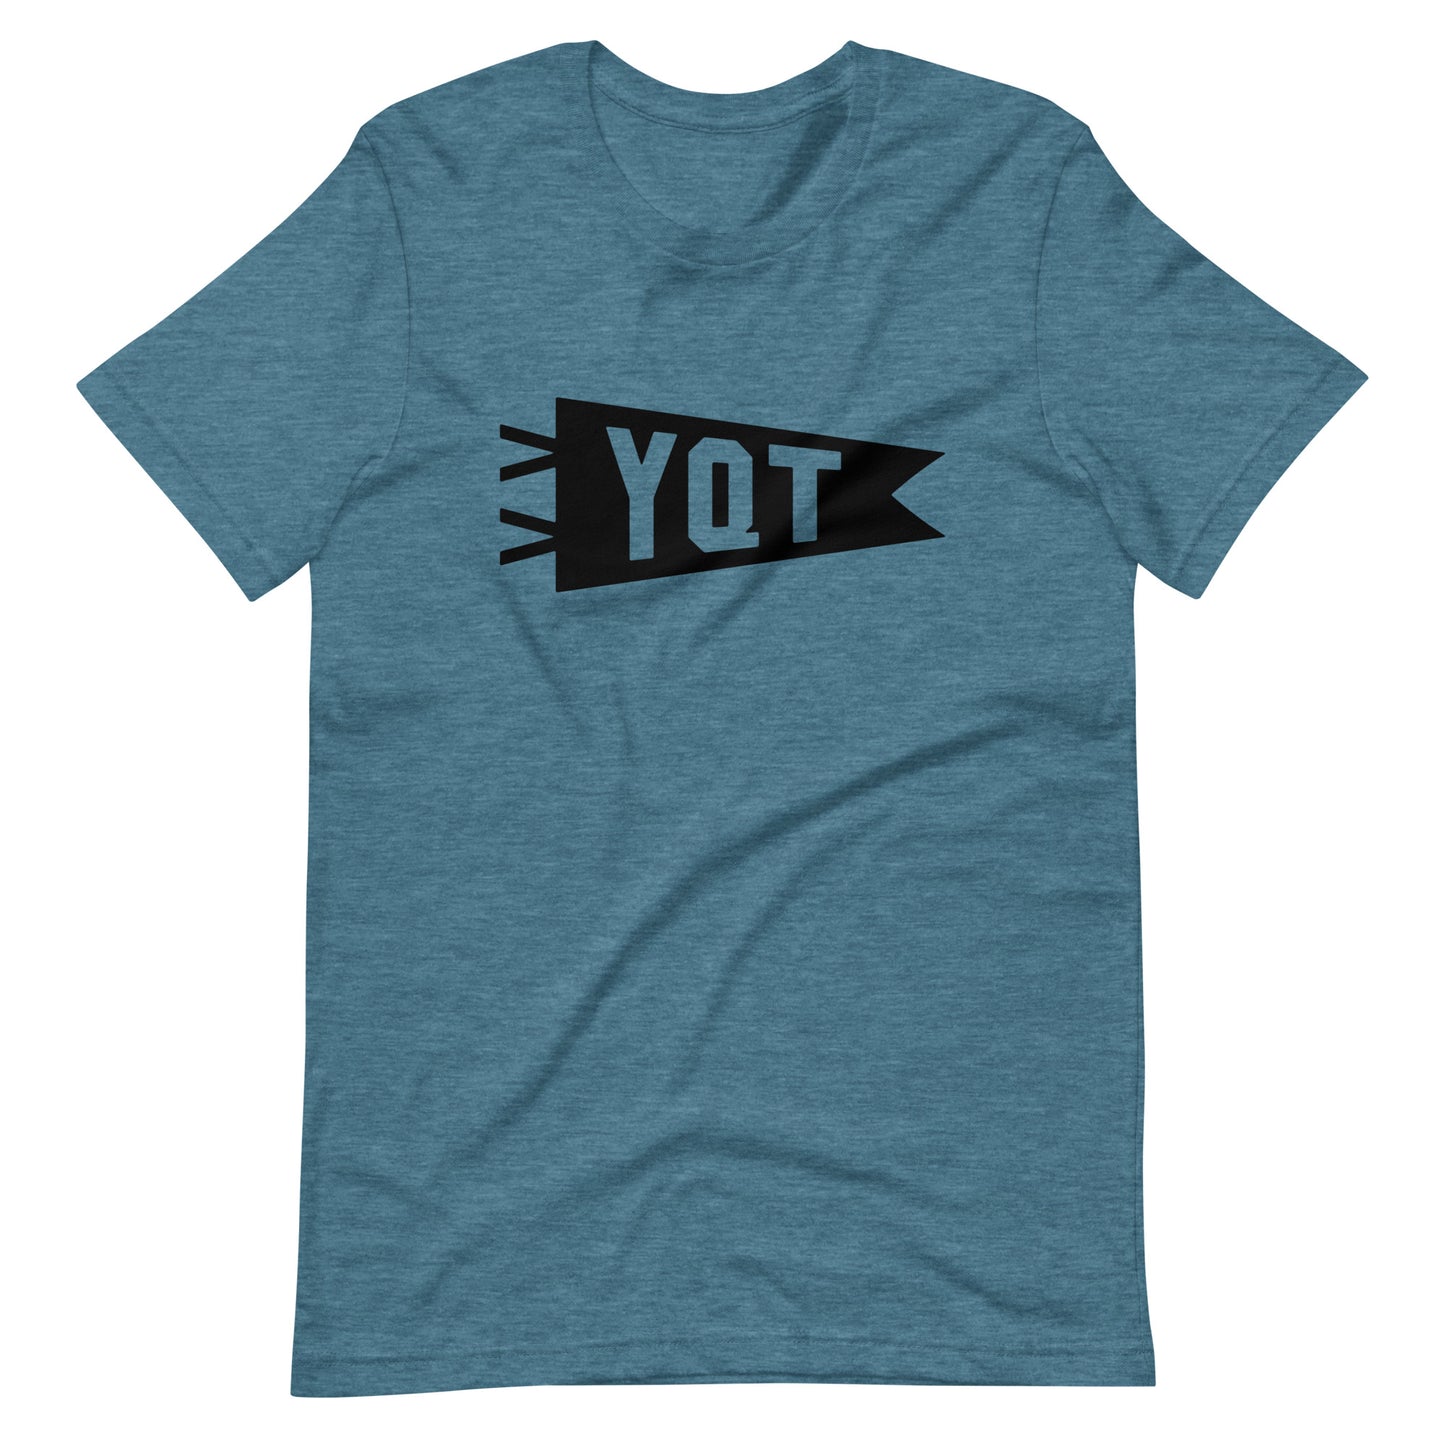 Airport Code T-Shirt - Black Graphic • YQT Thunder Bay • YHM Designs - Image 10